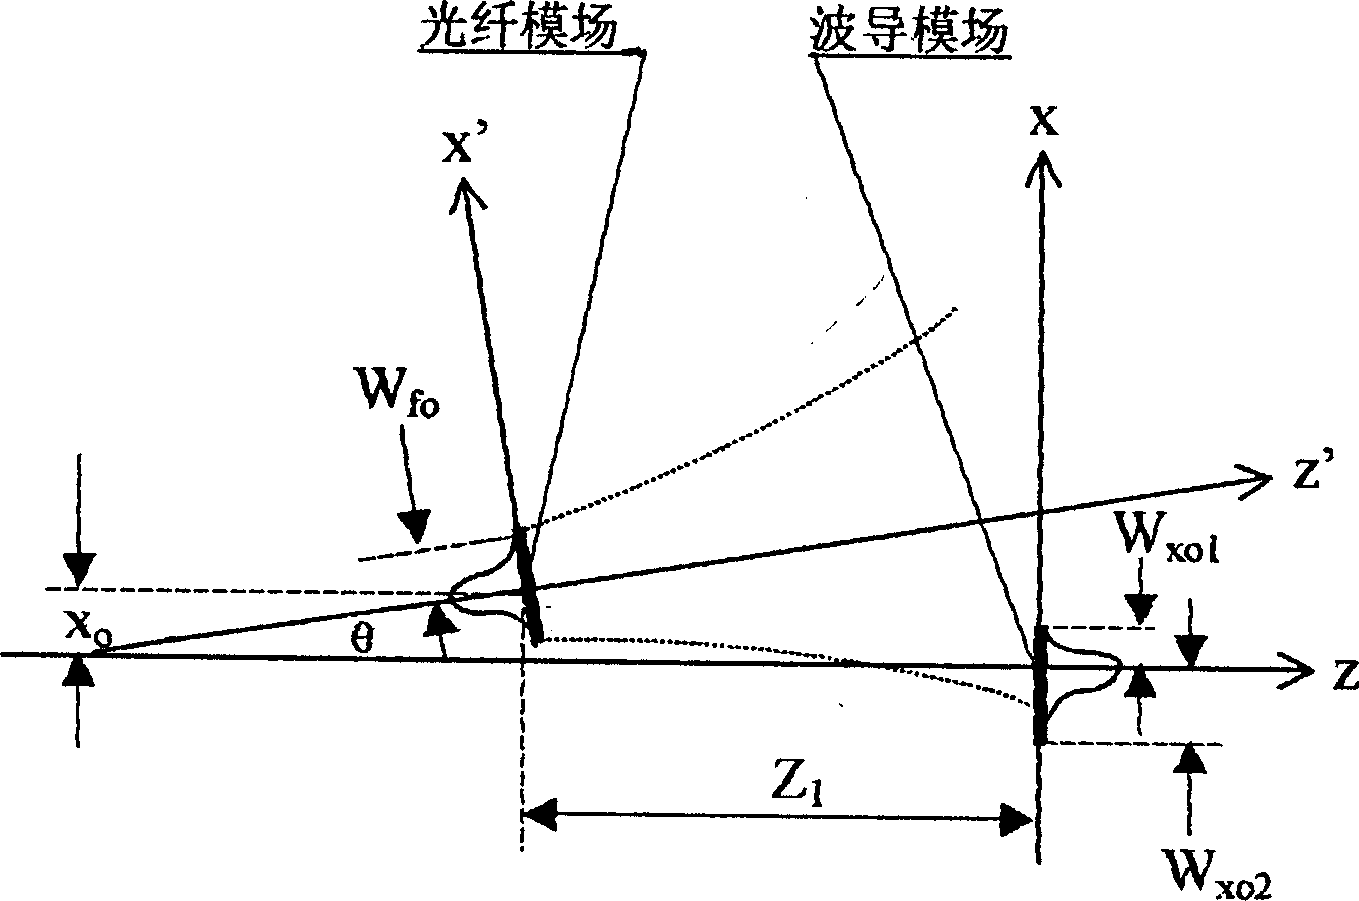 Mass center method for adjusting core making automatic end to end joint for wave-guide and optical fiber